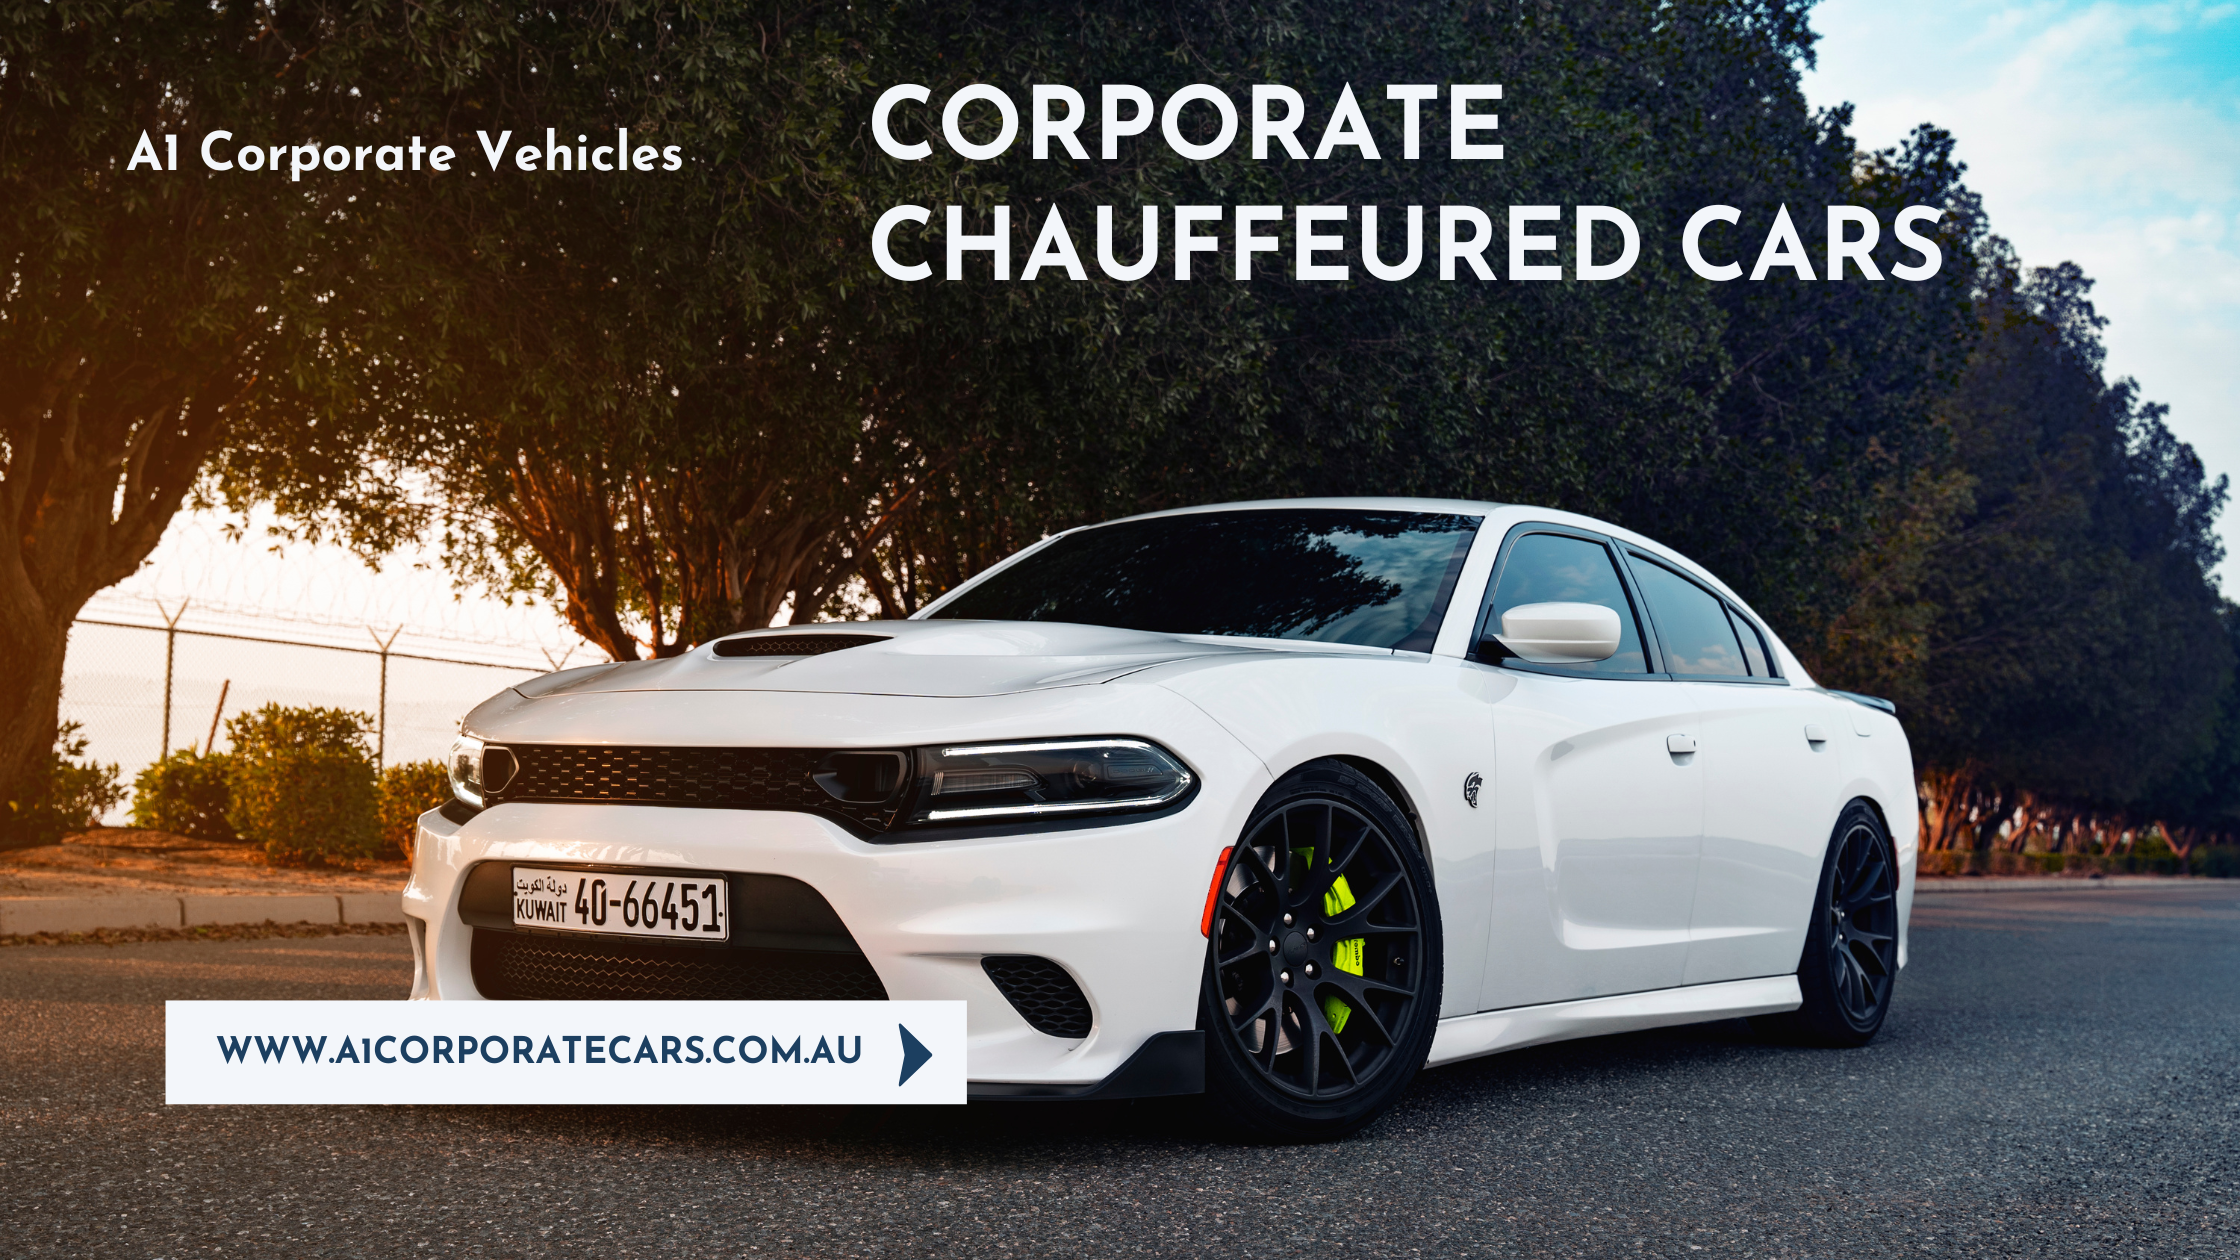 Corporate Chauffeured Cars